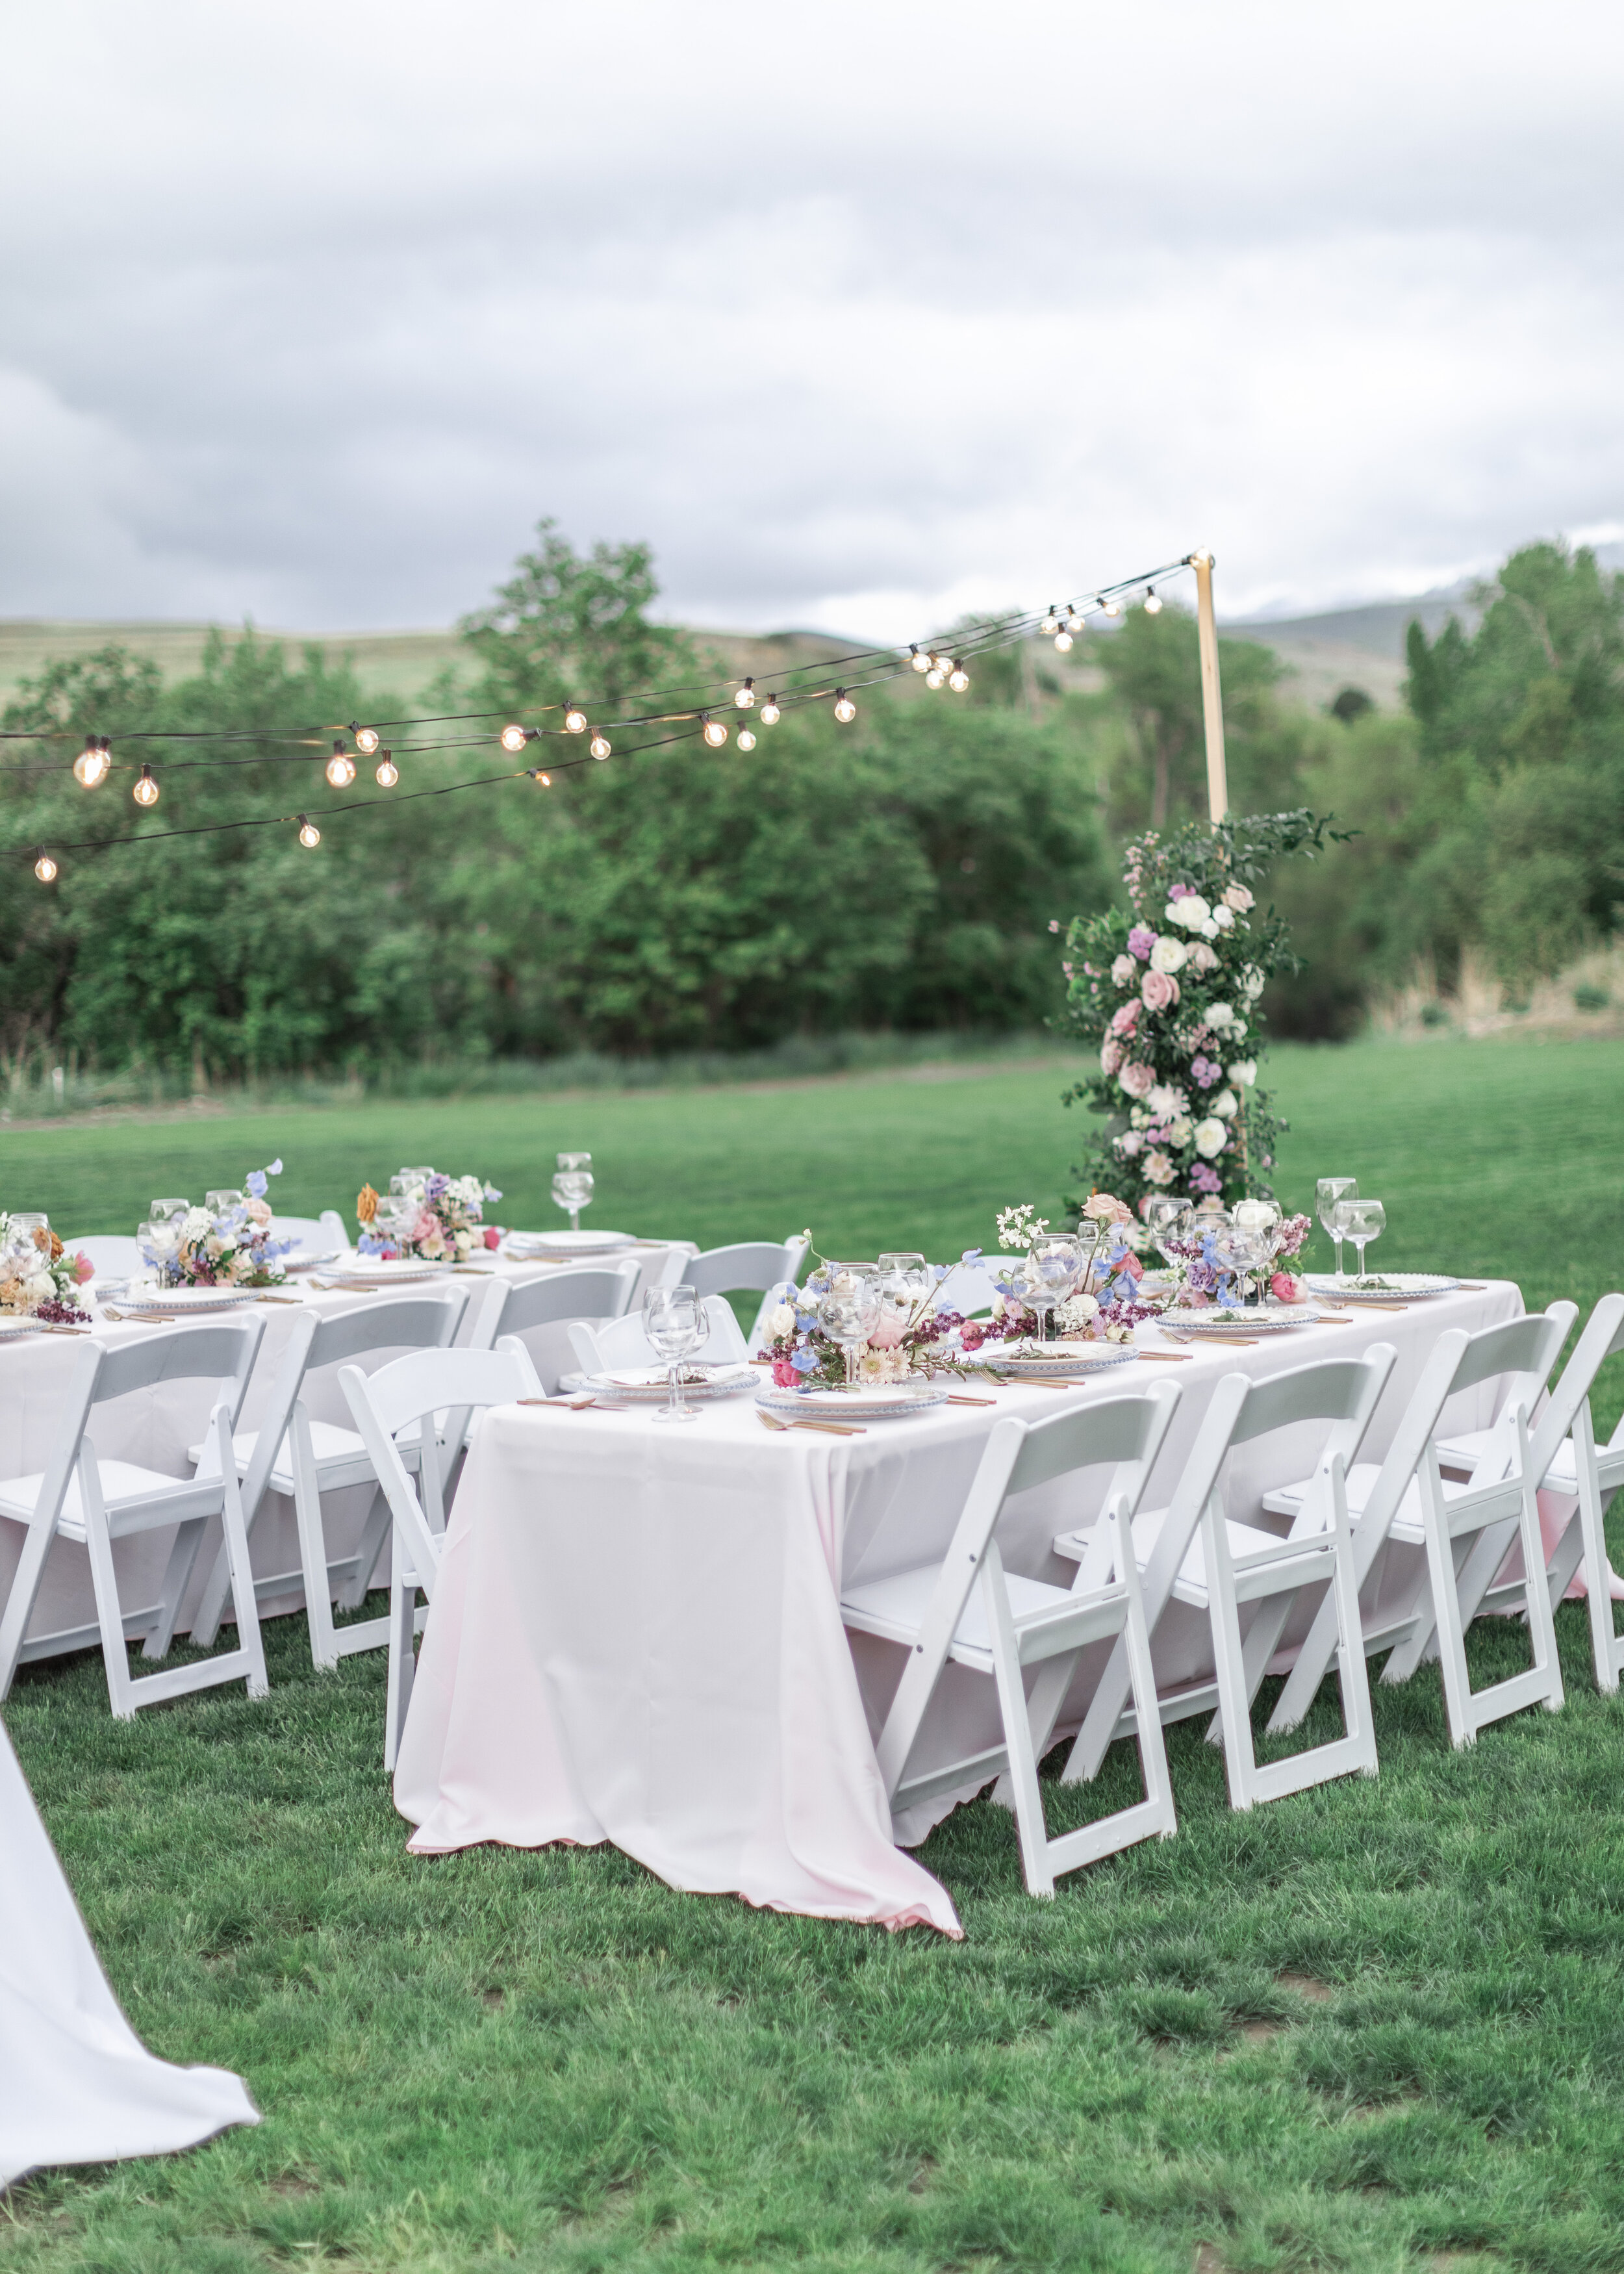  Clarity Lane Photography takes photographers through a whole wedding day in Logan,Utah and teaches them photo skills, featuring wedding dinner set-up. wedding reception set up outdoor table ideas #claritylanephotography #claritylaneweddings #clarity